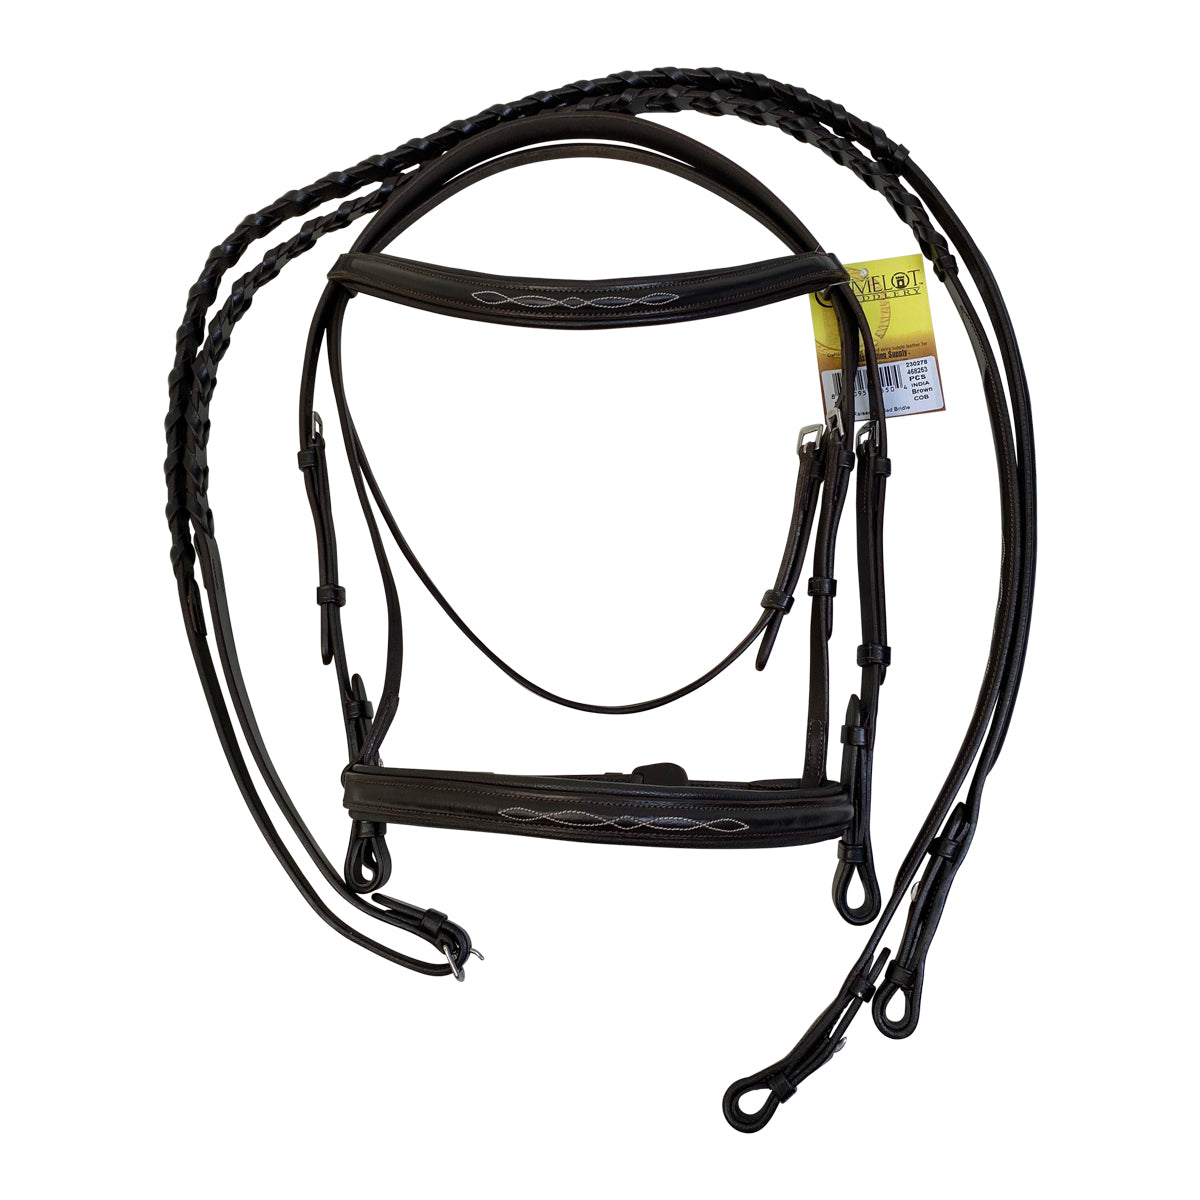 Camelot 'Fancy Raised' Padded Bridle in Brown 